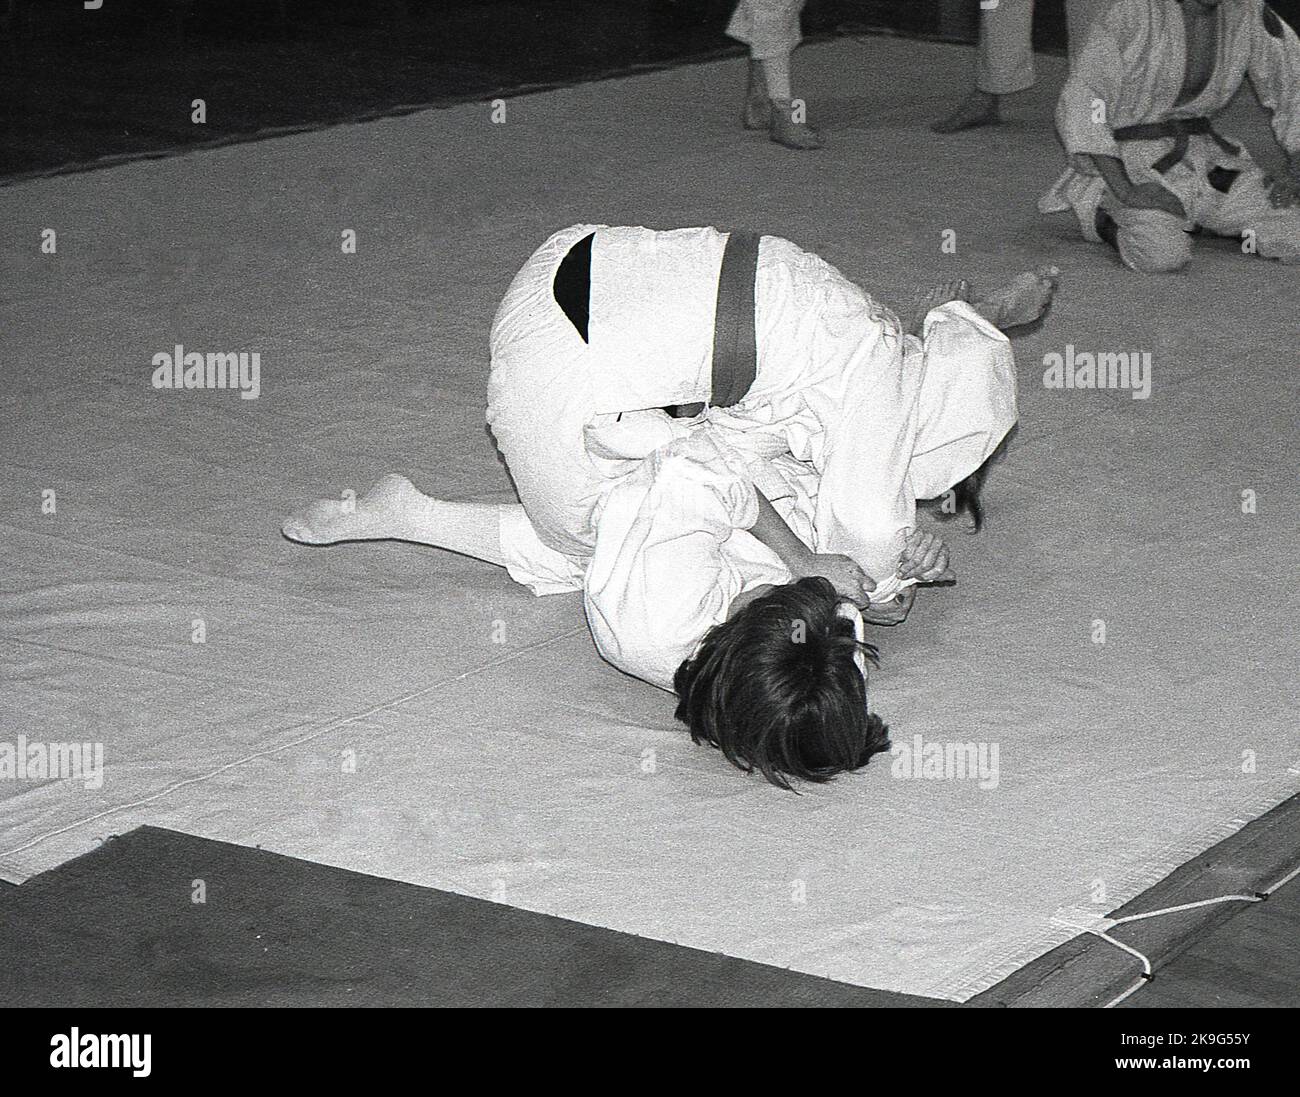 1970s, historical, inside, on a mat, two girls competing in the sport of judo, a physical activity that involves two people wrestling and trying to throw each other to the ground. Judo is a Japanese word meaning 'art of gentleness' and derives from the ancient Japanese martial art of jujitsu. Stock Photo